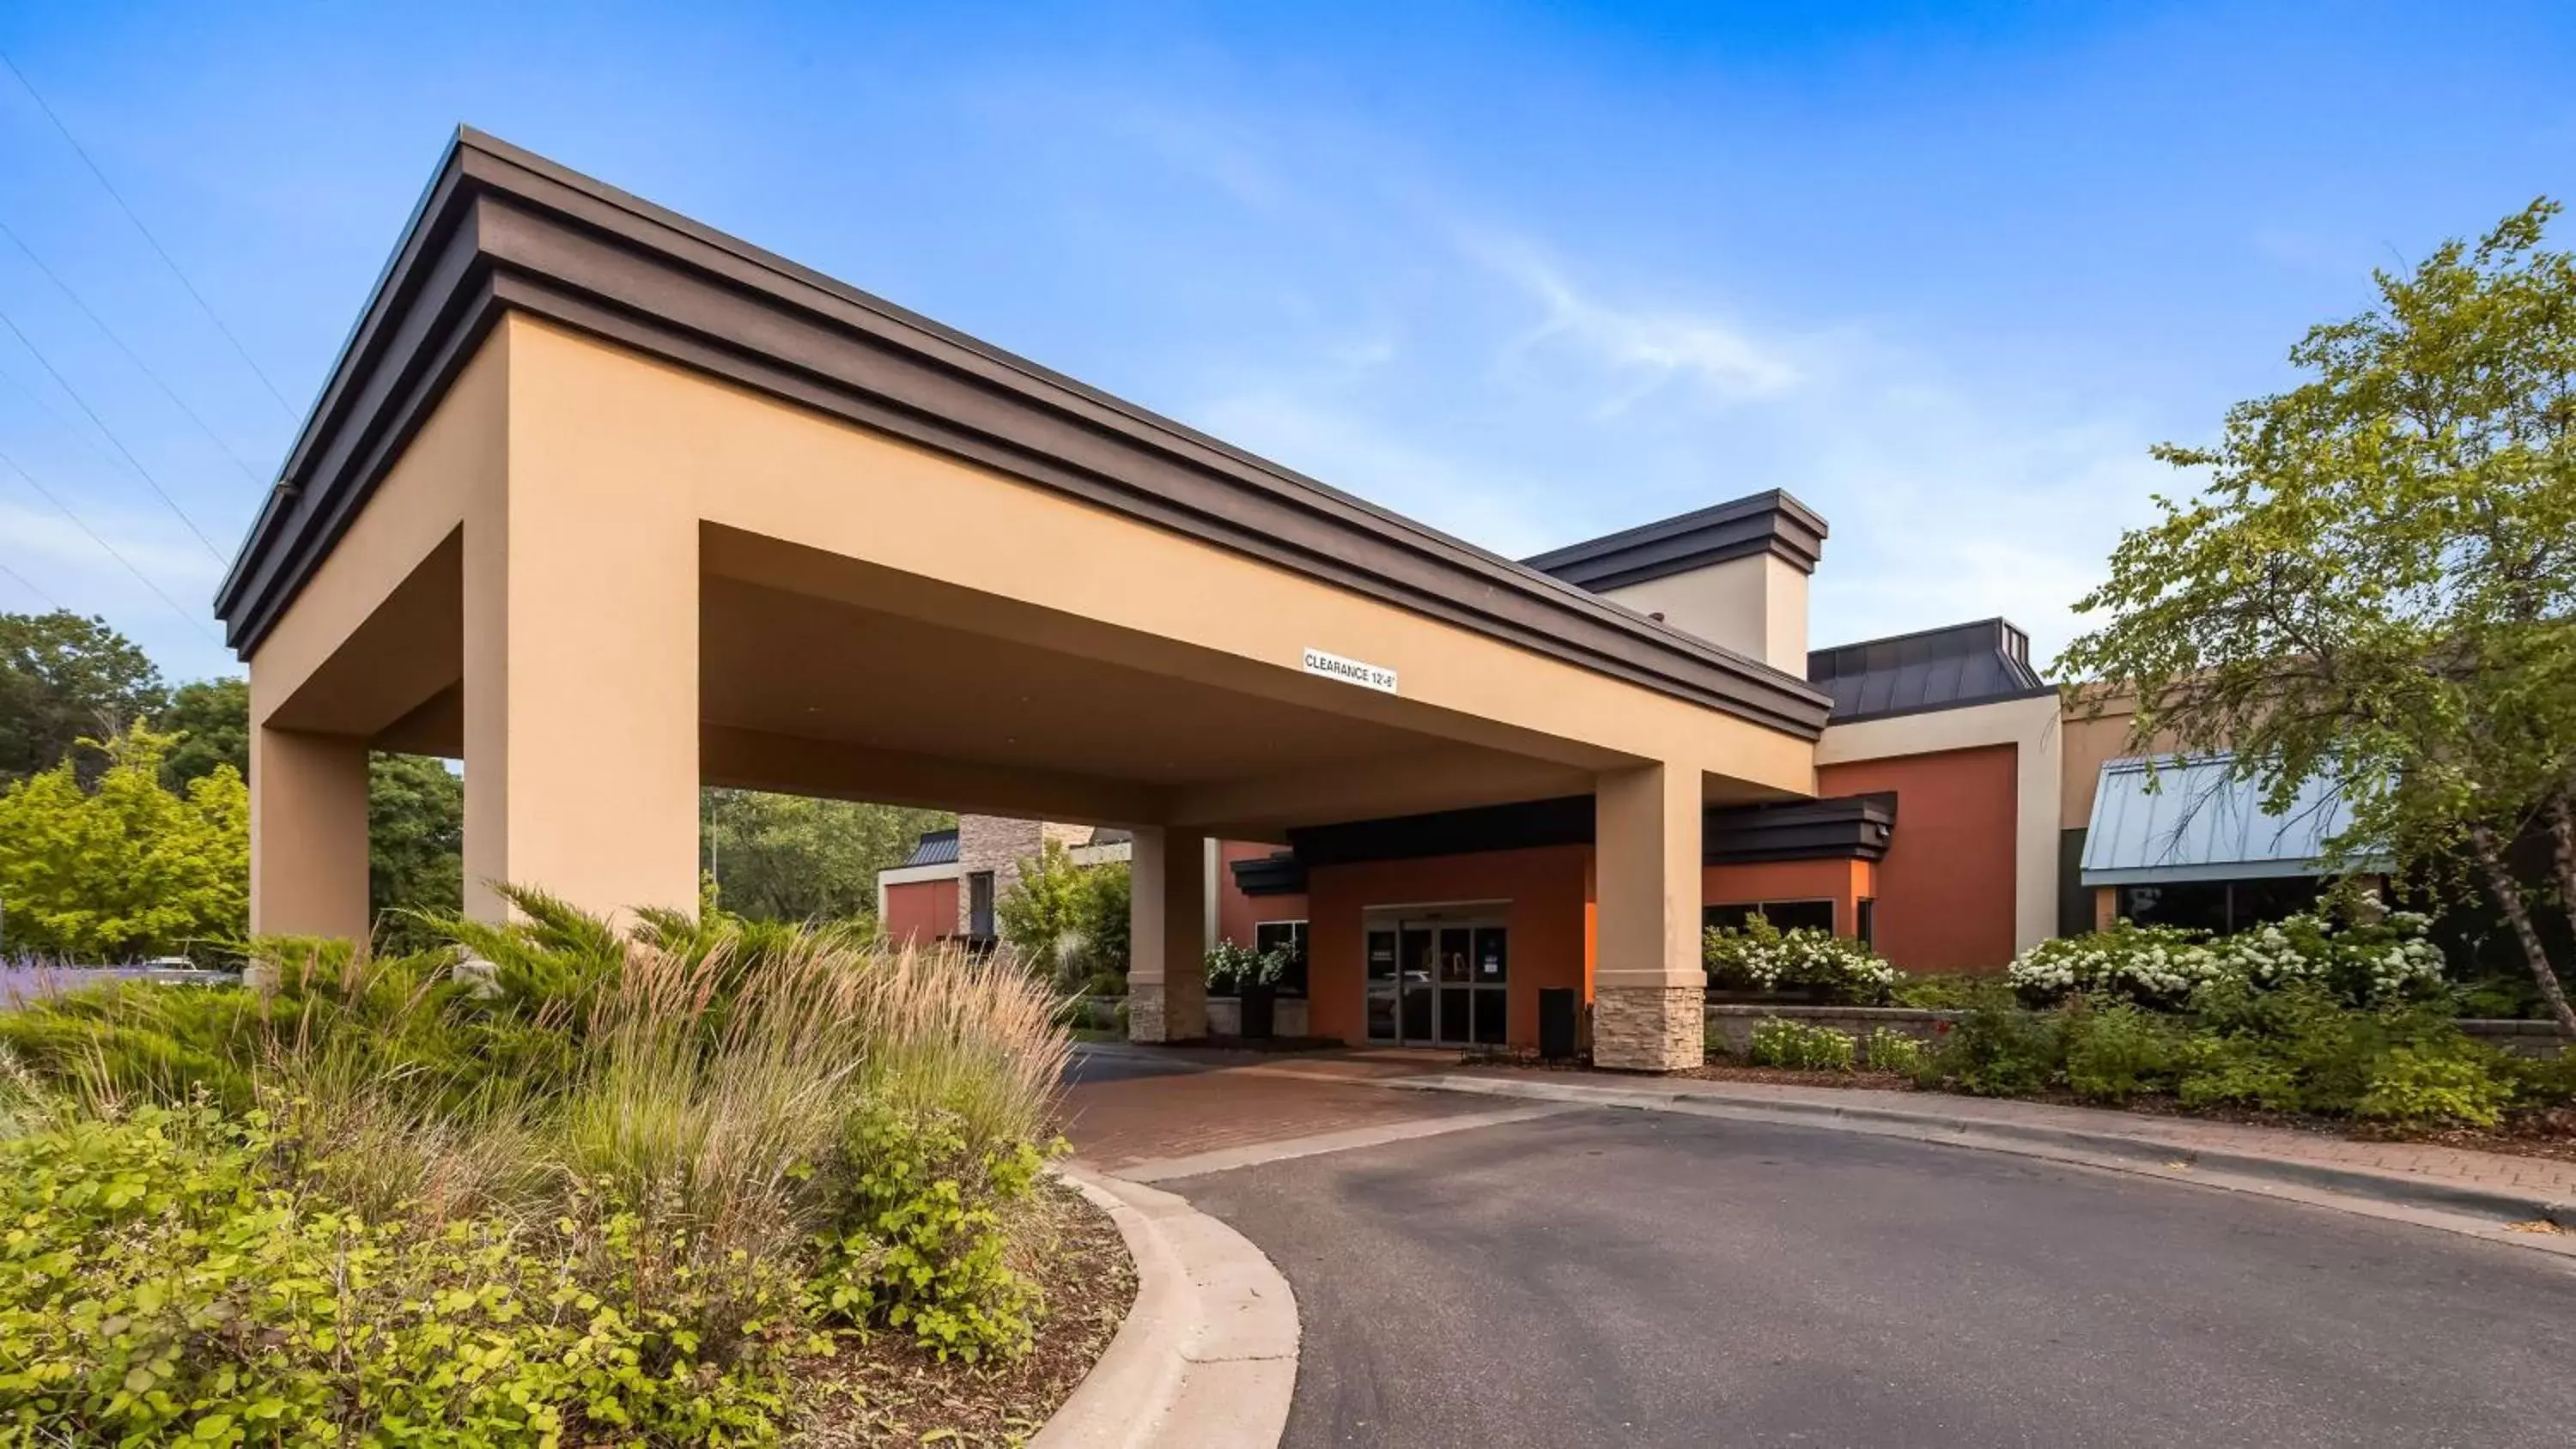 Property Building in Best Western Plus St. Paul North/Shoreview